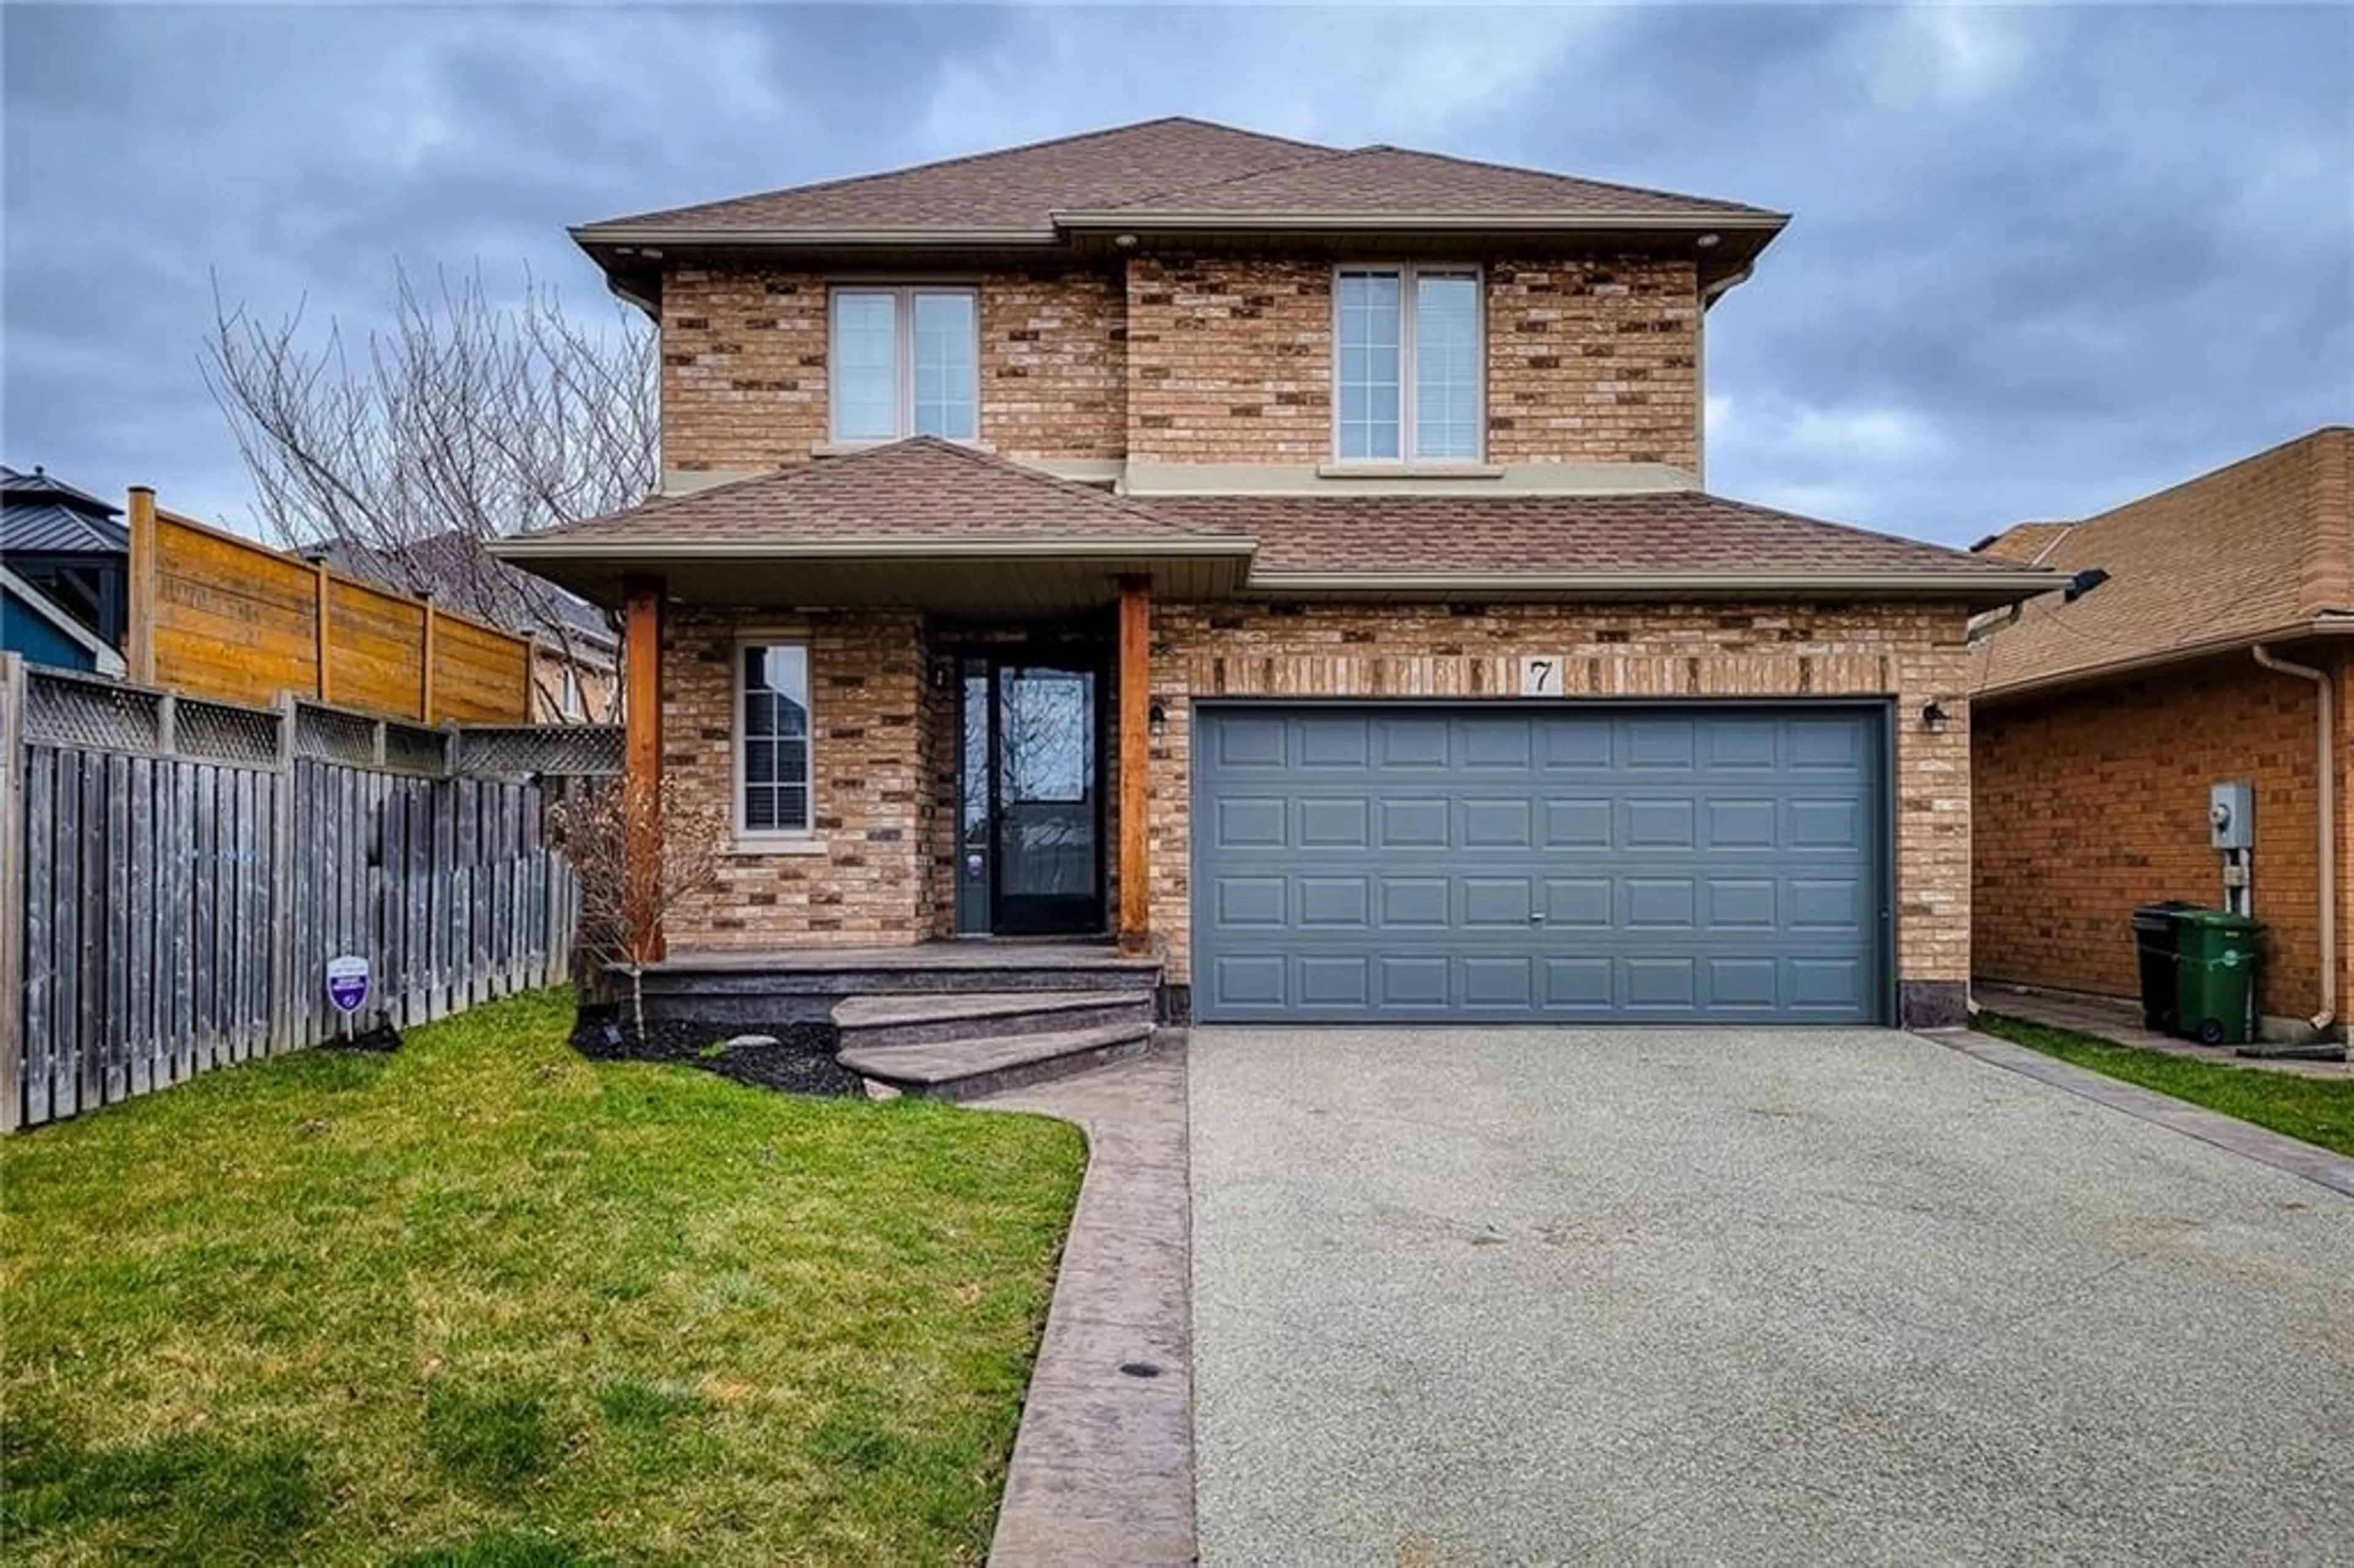 Home with brick exterior material for 7 fulmar Way, Hamilton Ontario L0R 1W0